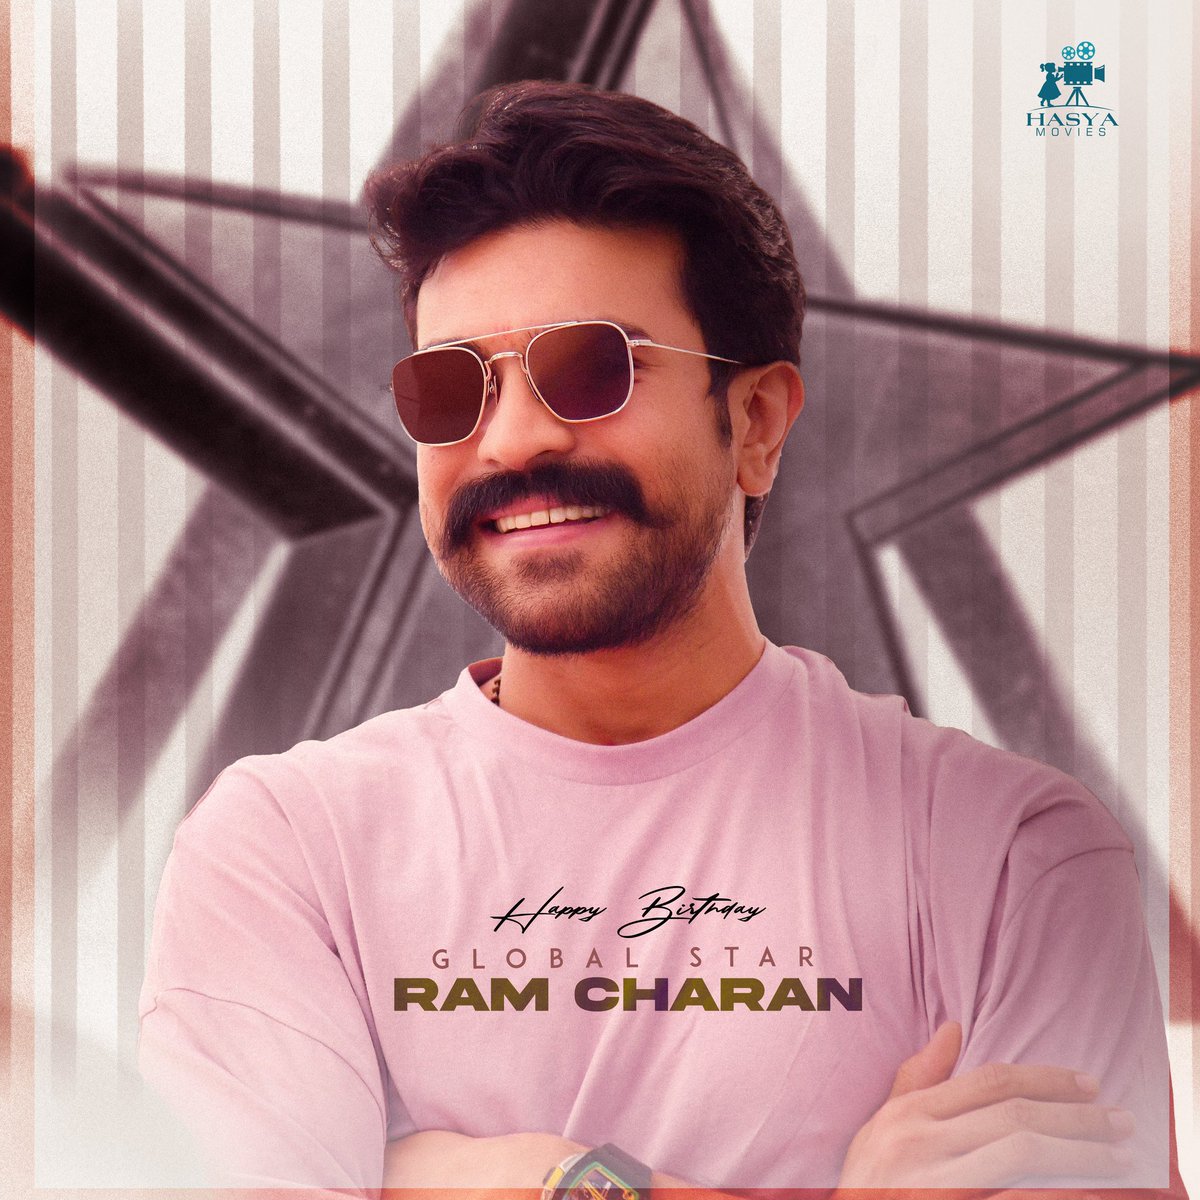 Wishing GLOBAL STAR @AlwaysRamCharan garu a very happy birthday 🎉have a Blockbuster year ahead with good health success and prosperity, best wishes for #GameChanger & all your future endeavours ✨ #HBDRamCharan